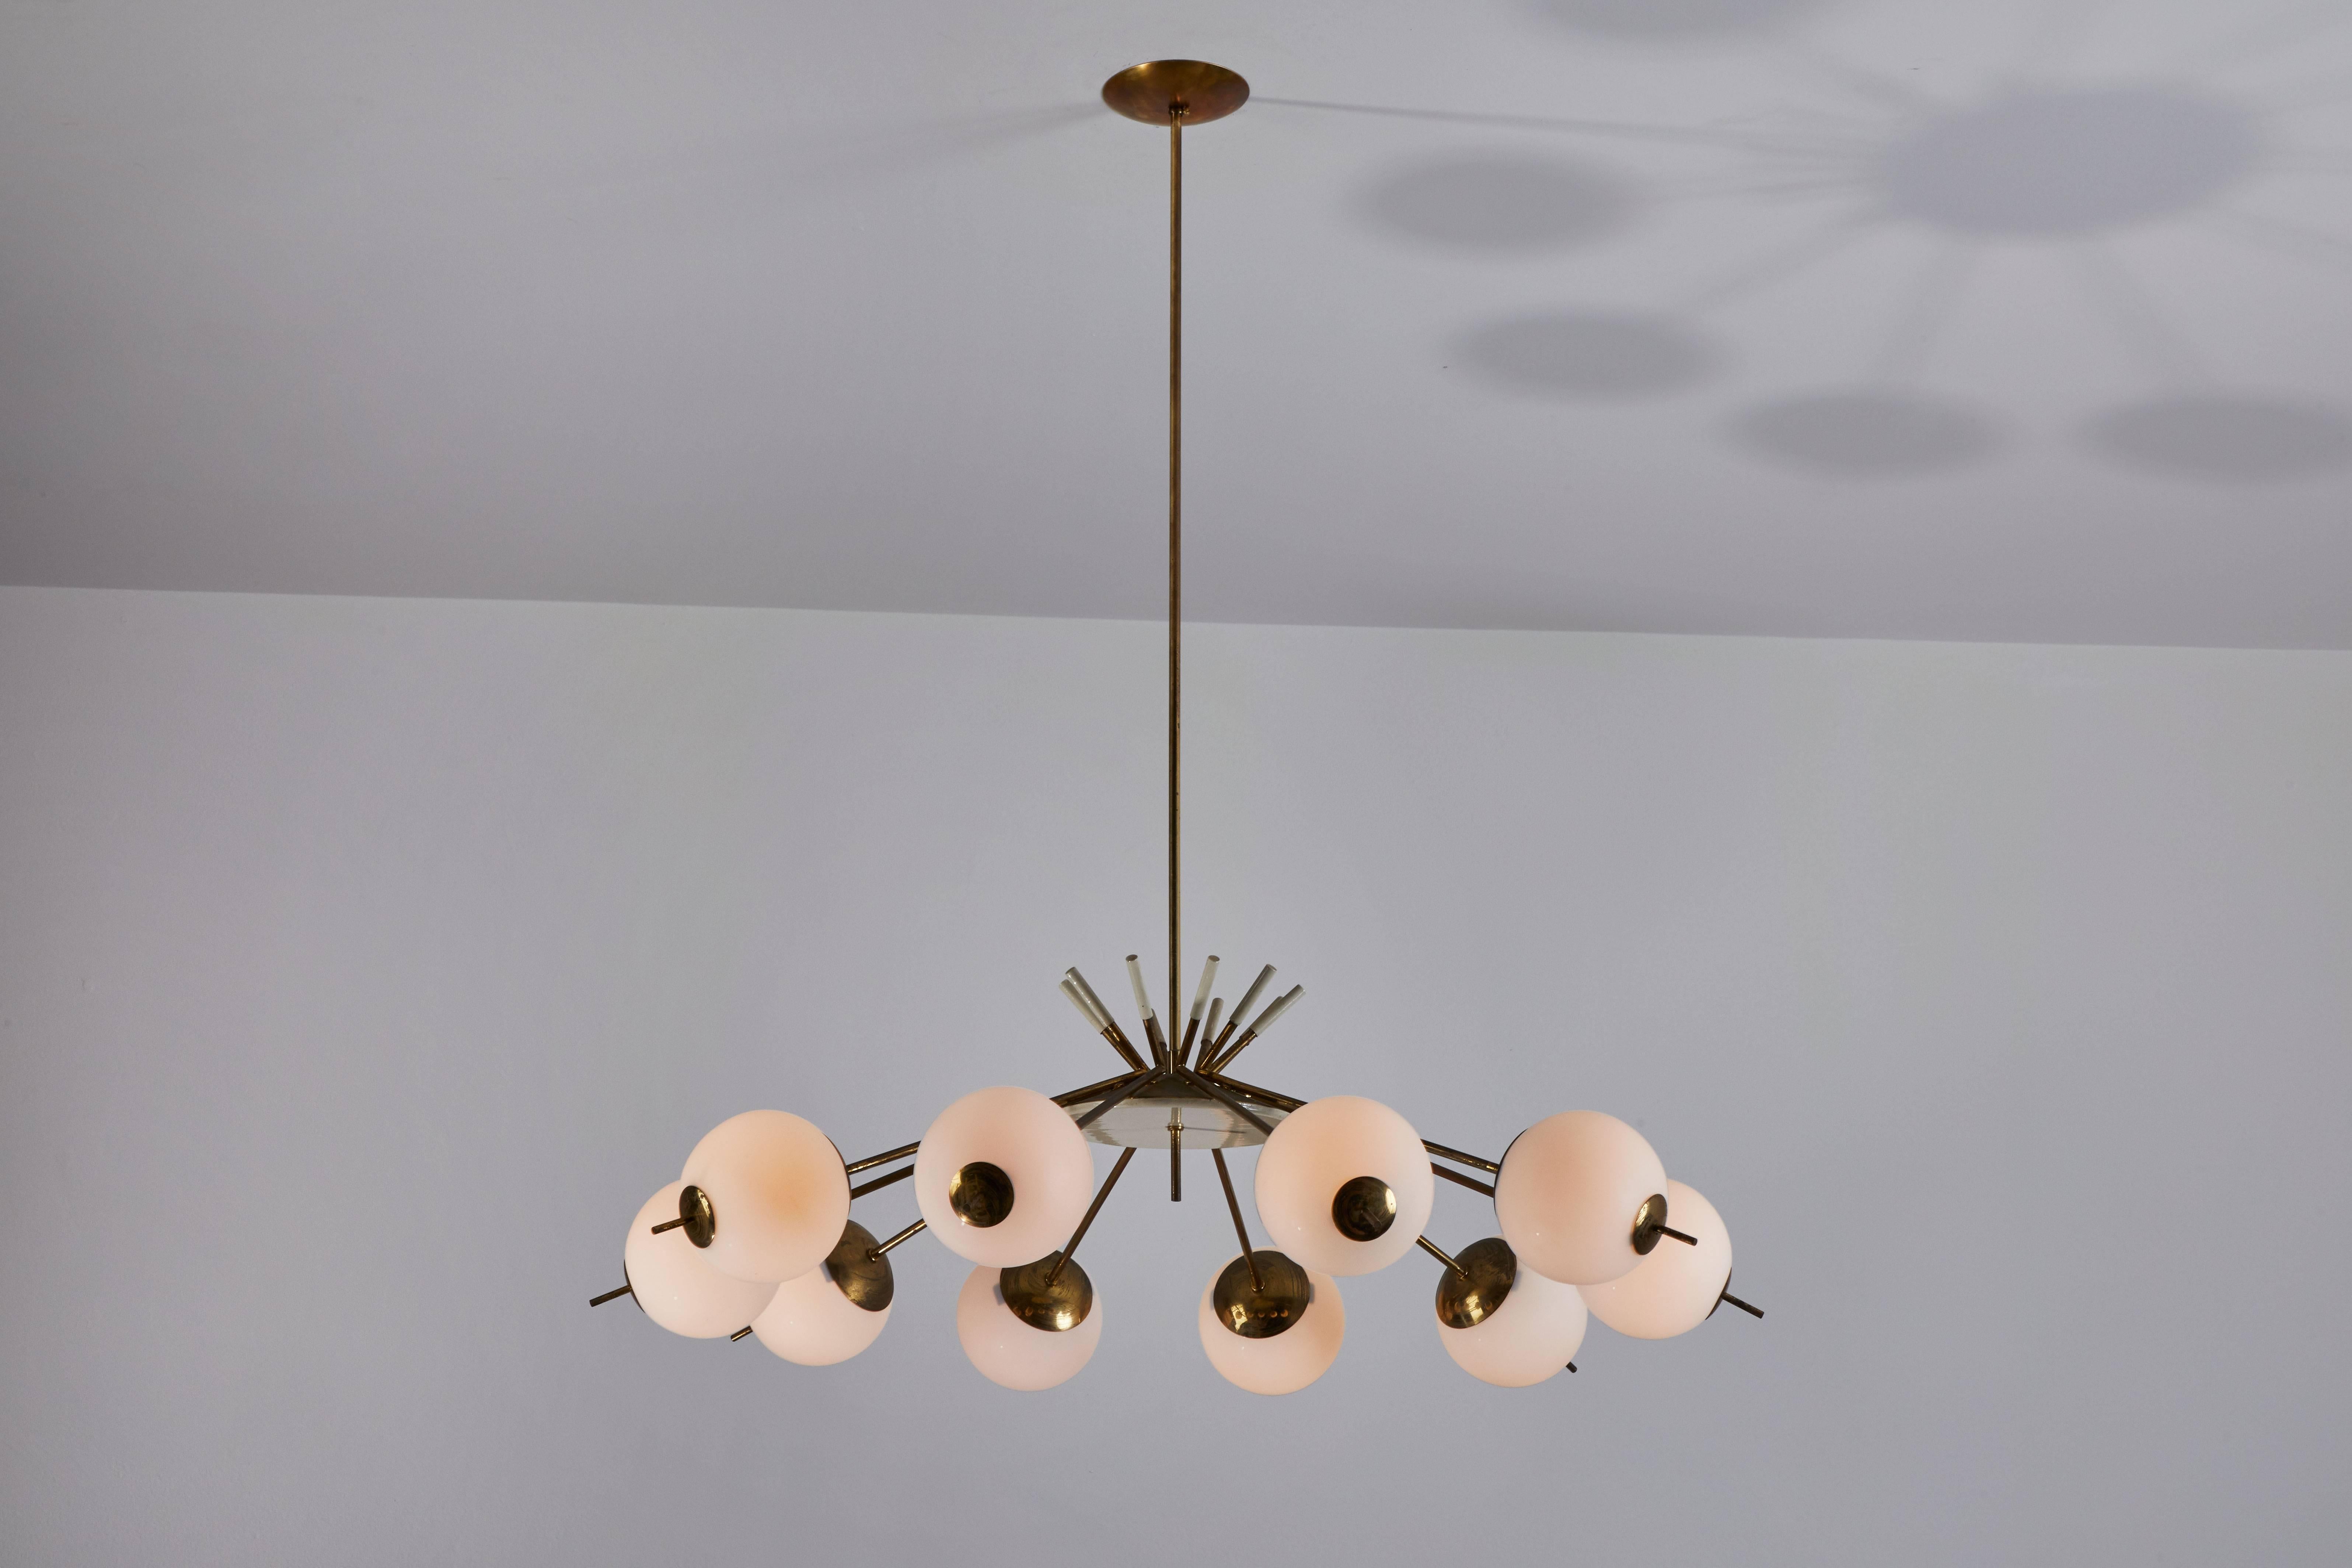 Ten globe chandelier attributed to Stilnovo. Manufactured in Italy, circa 1950s. Brushed satin glass globes, enameled metal with brass stem and hardware. Custom brass canopy. Rewired for US junction boxes. Each globe takes one E14 25w maximum bulb.